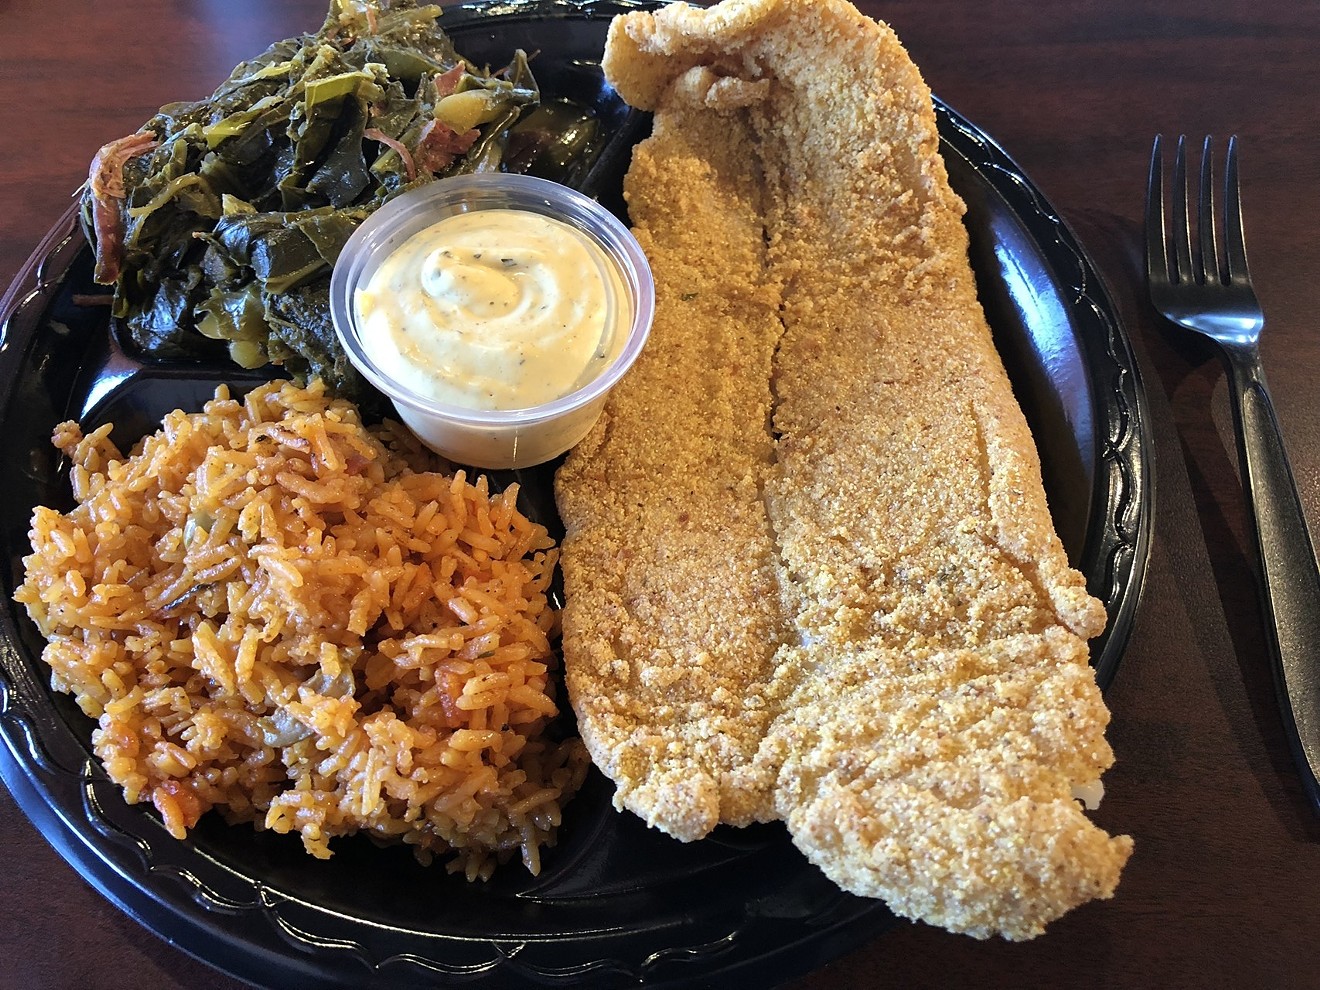 Fried swai, rice, and collards from Rhema Soul Cuisine — soon to be a food truck.